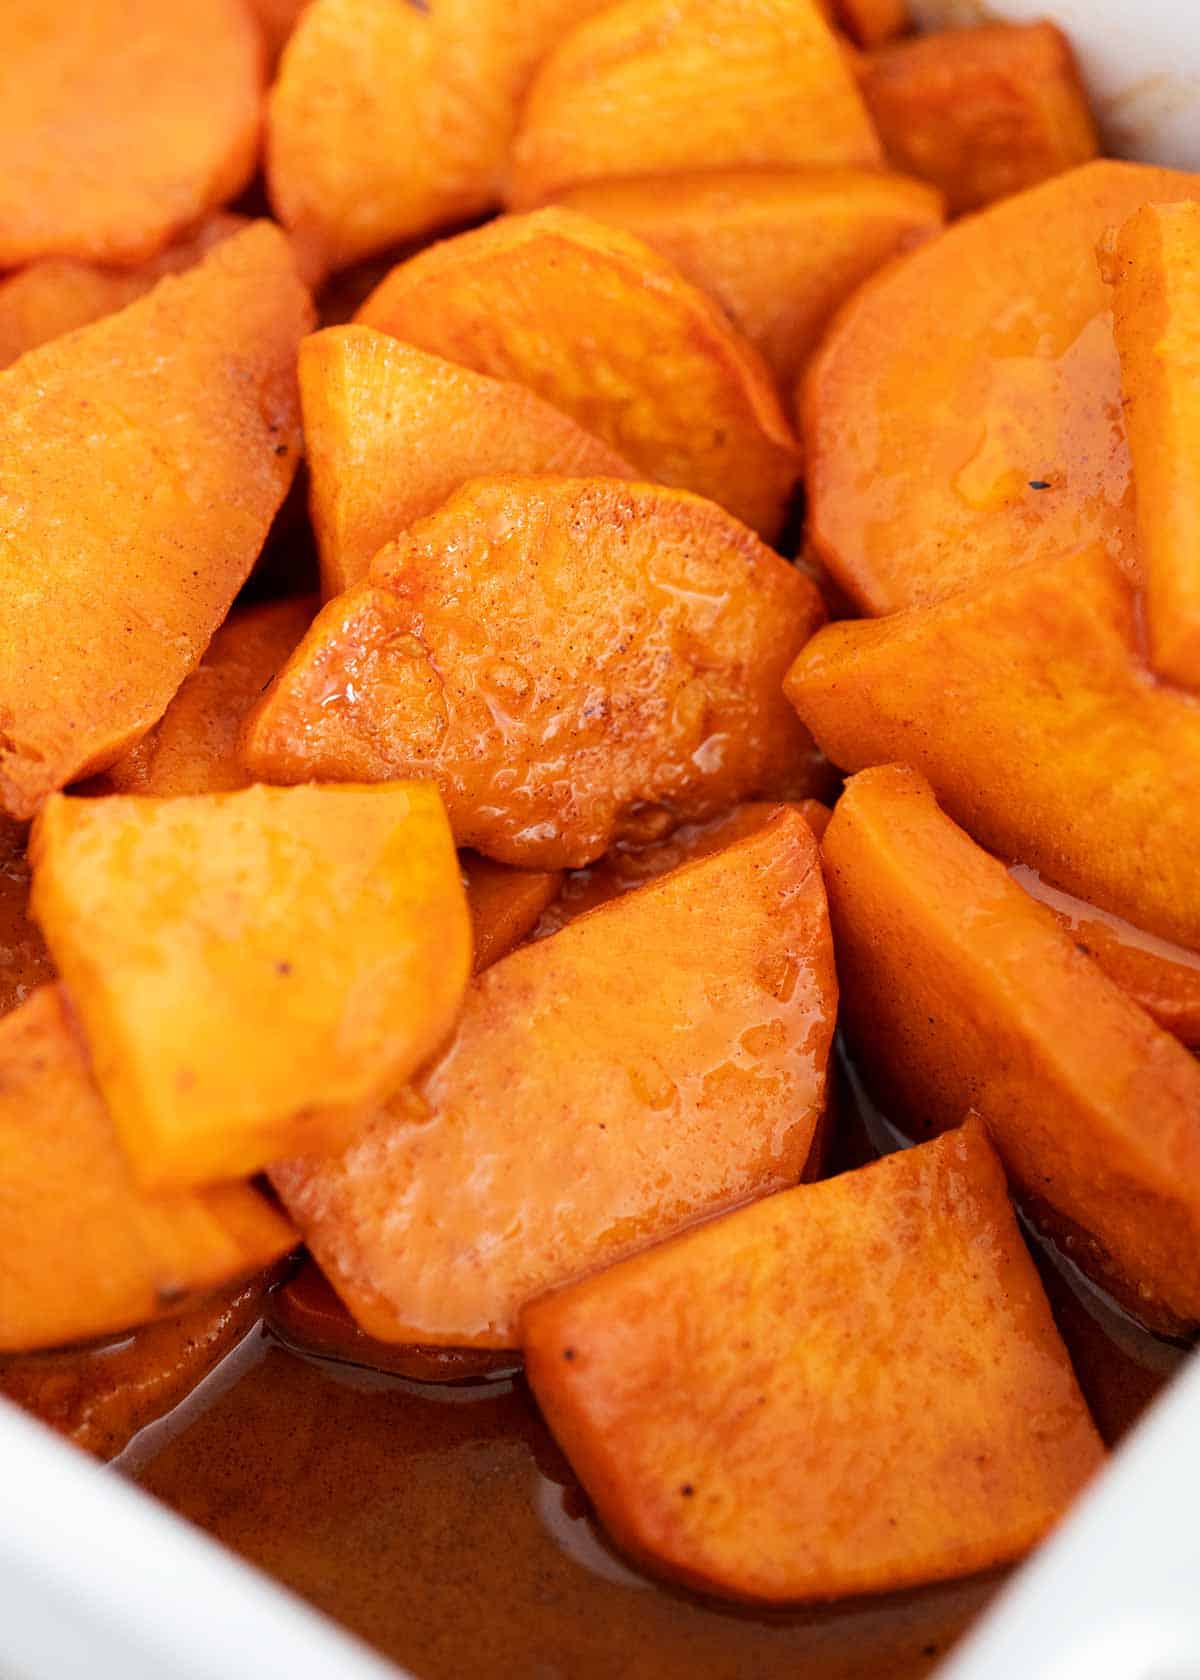 Candied yams in sauce.